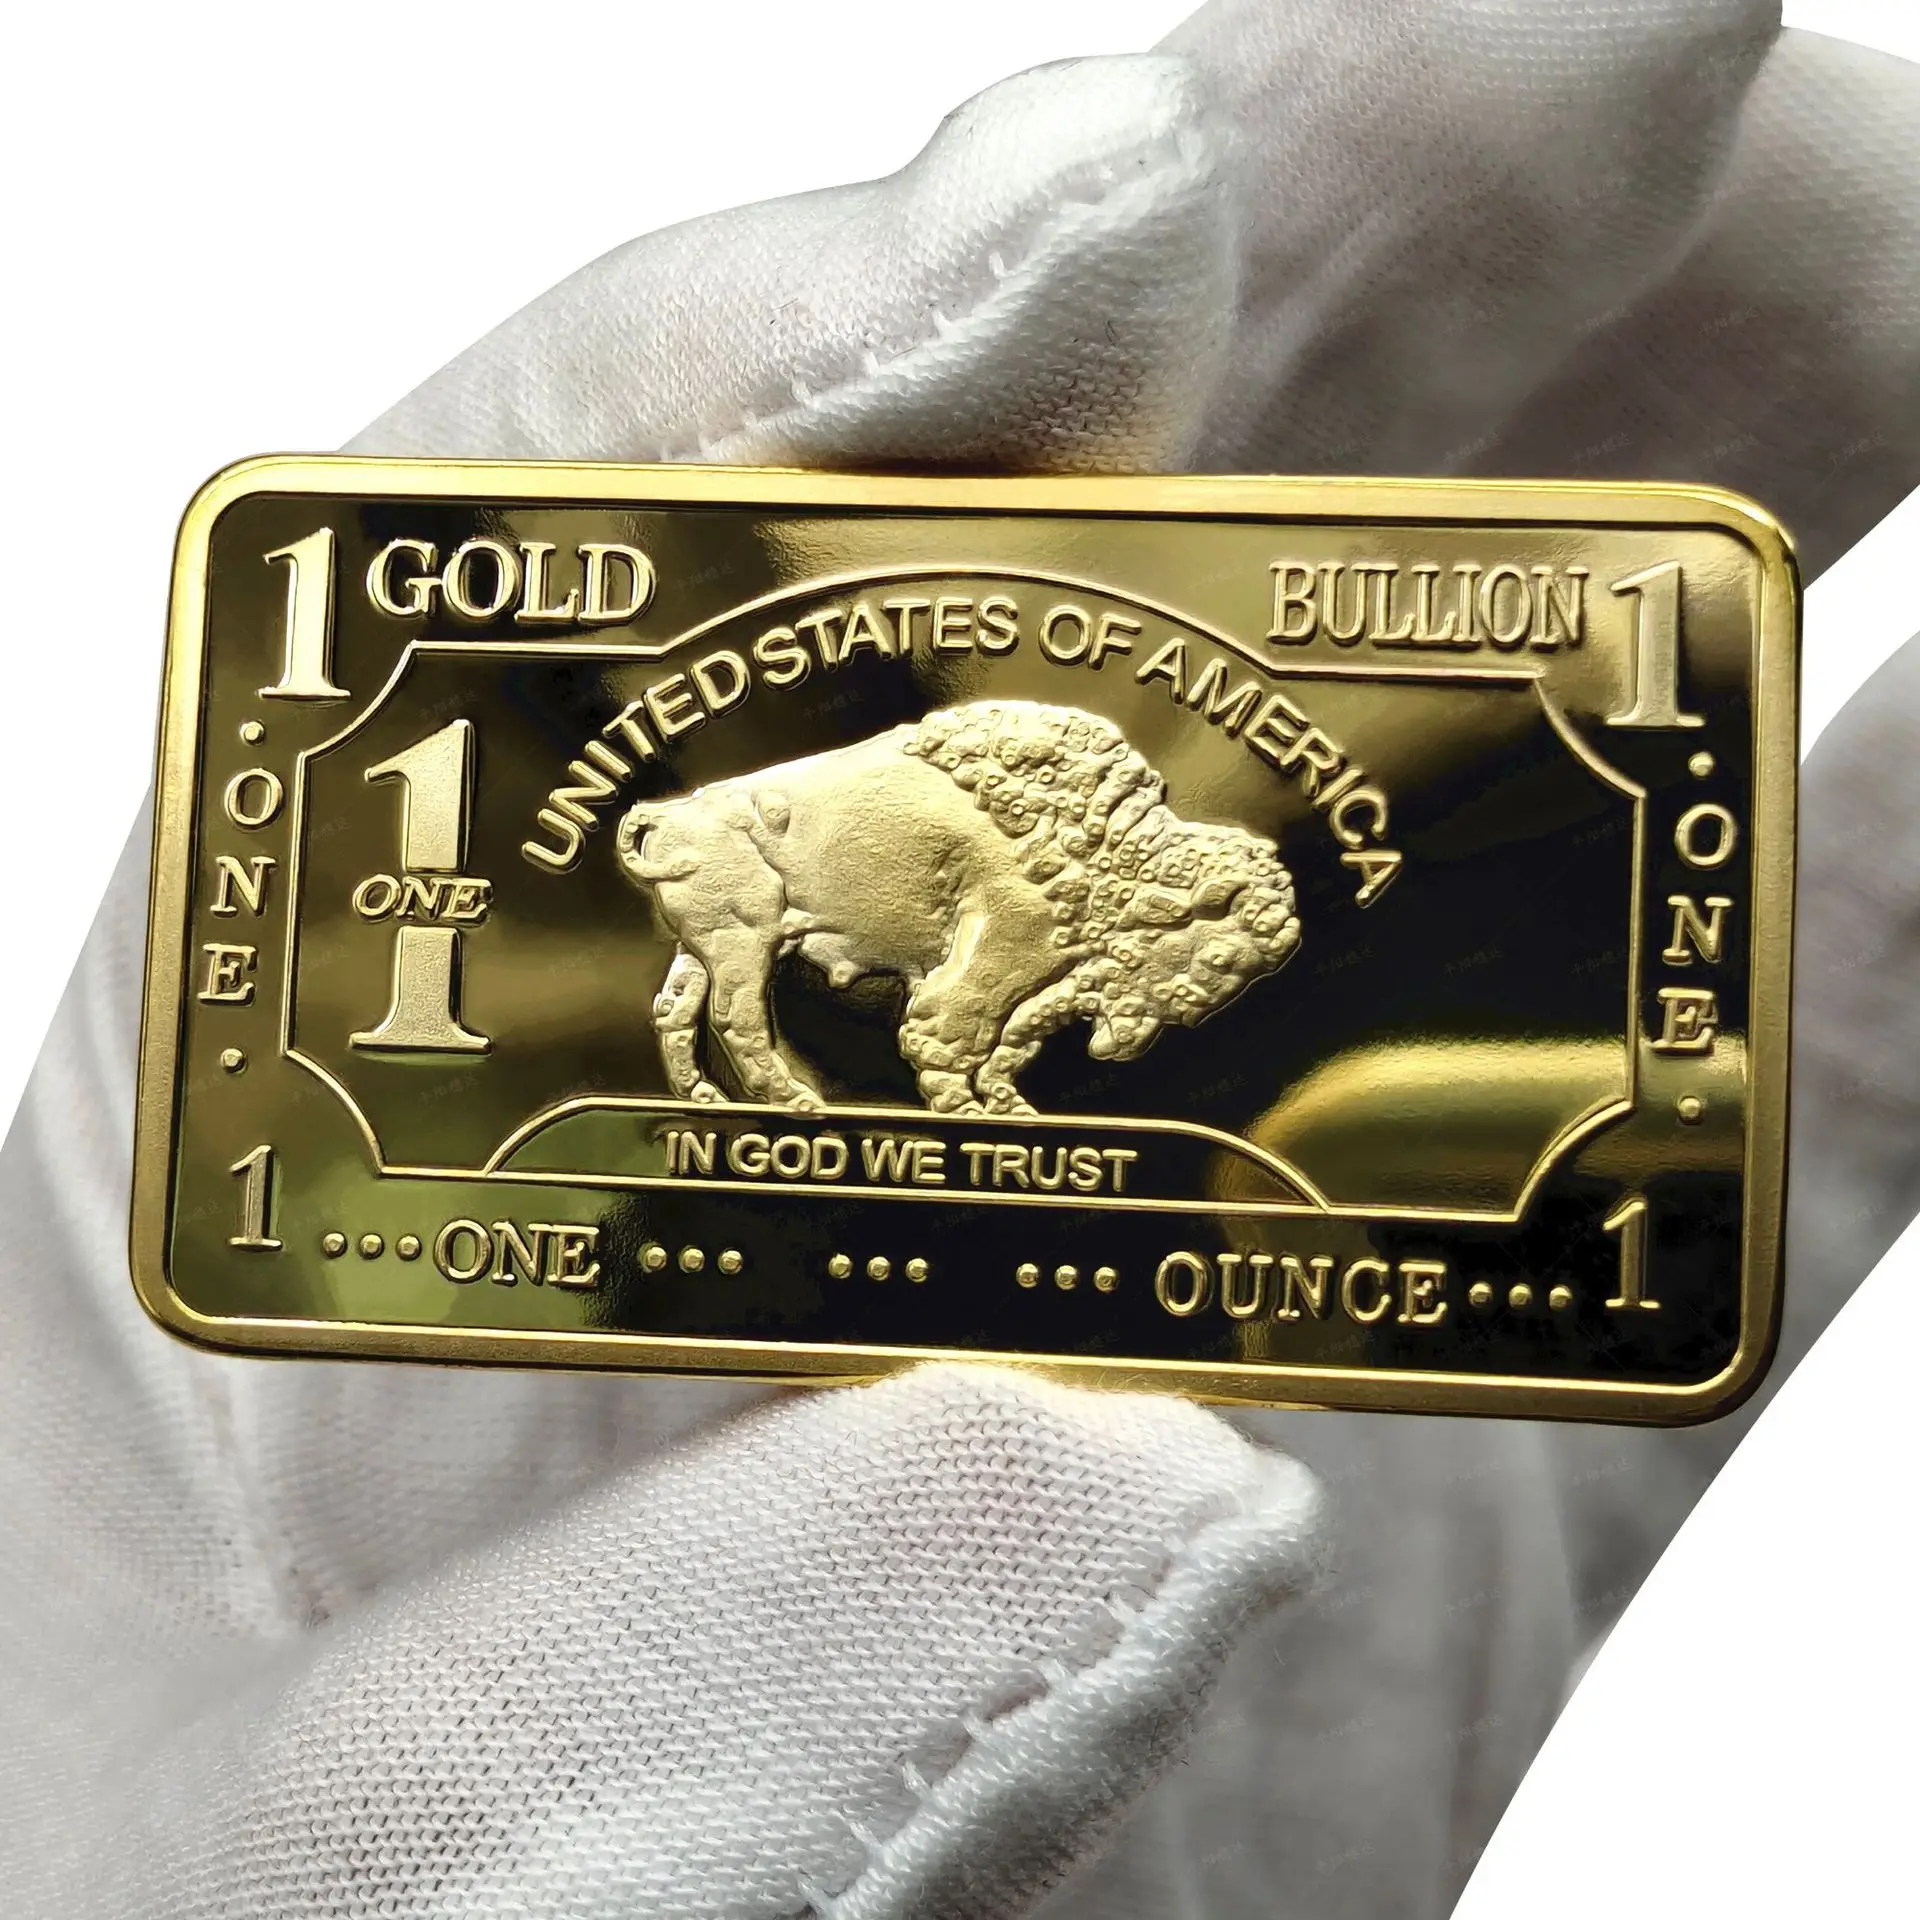 

New Gold Plated Bullion Beauty Bar United States Of America 1 Troy Ounce Replica Gold Clad Buffalo Bar